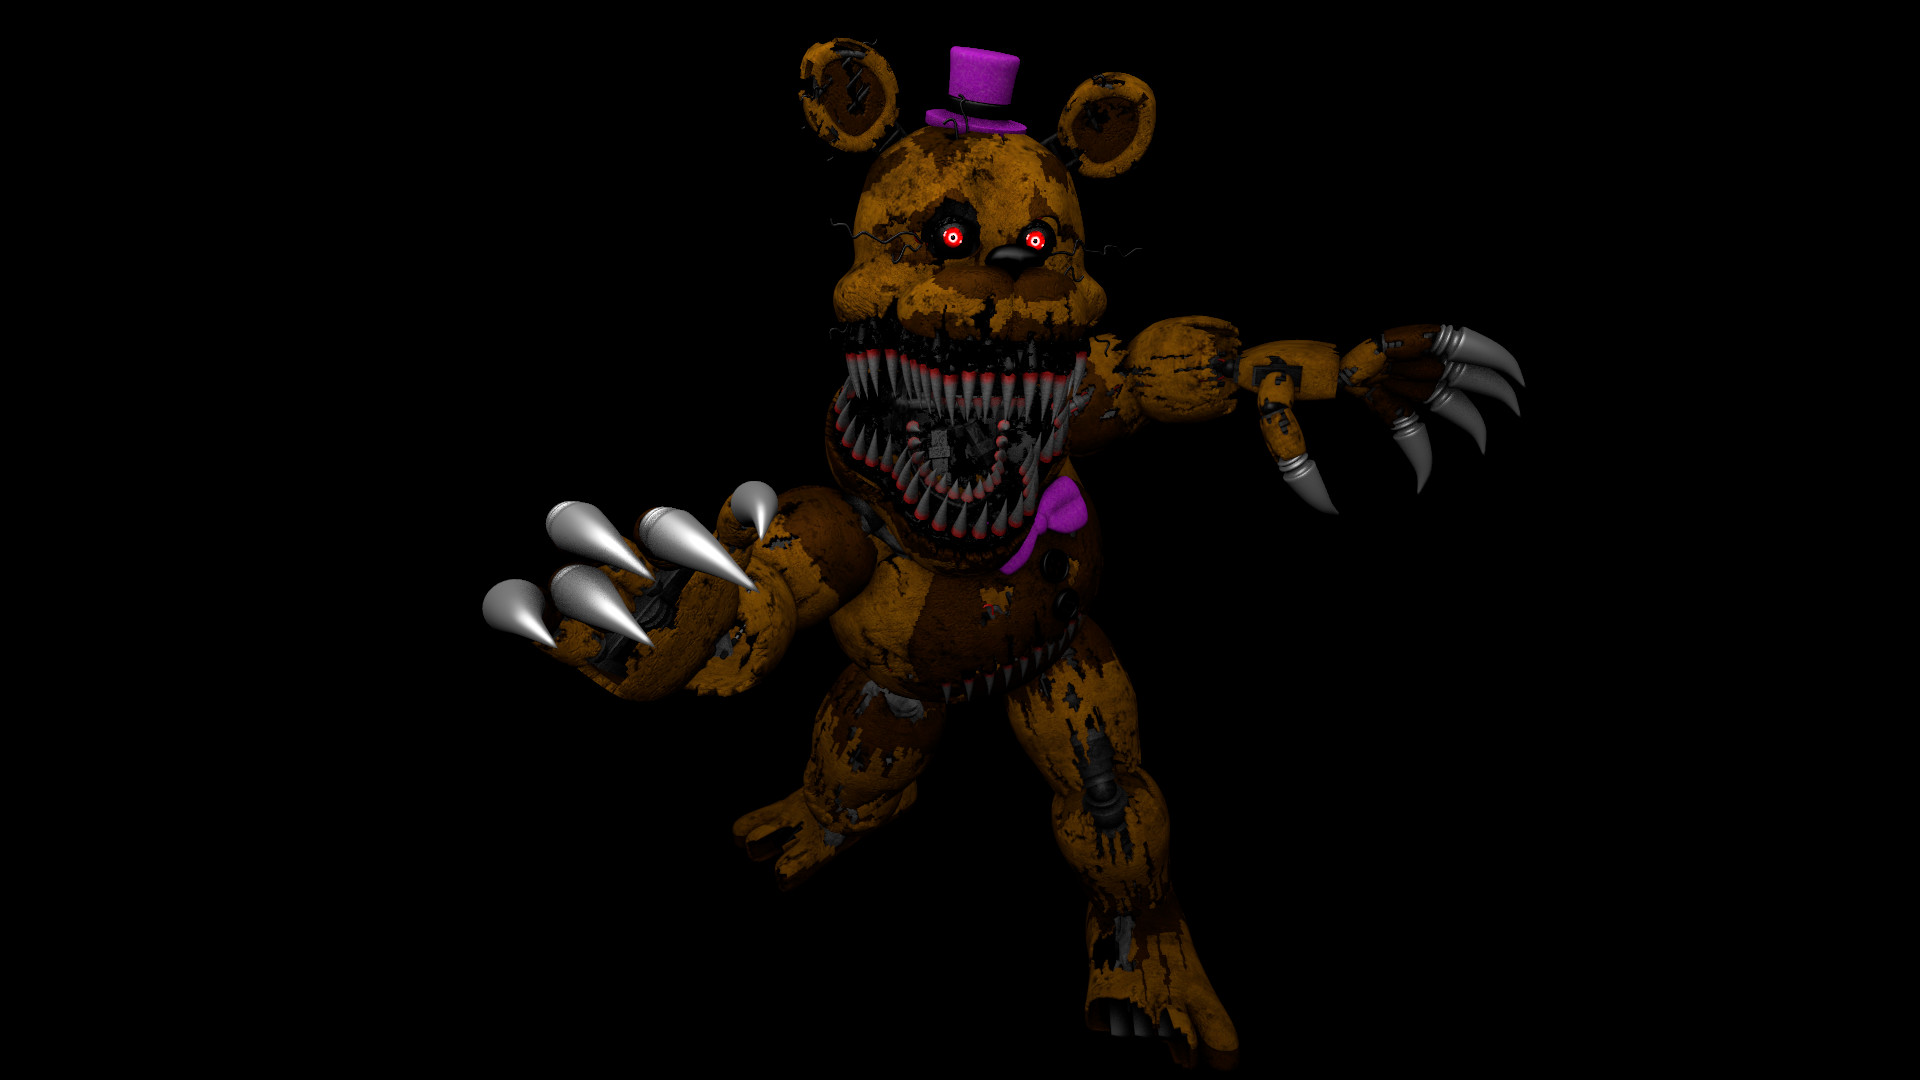 1920x1080 ... Nightmare Fredbear (SFM) by Sweets-and-Onions